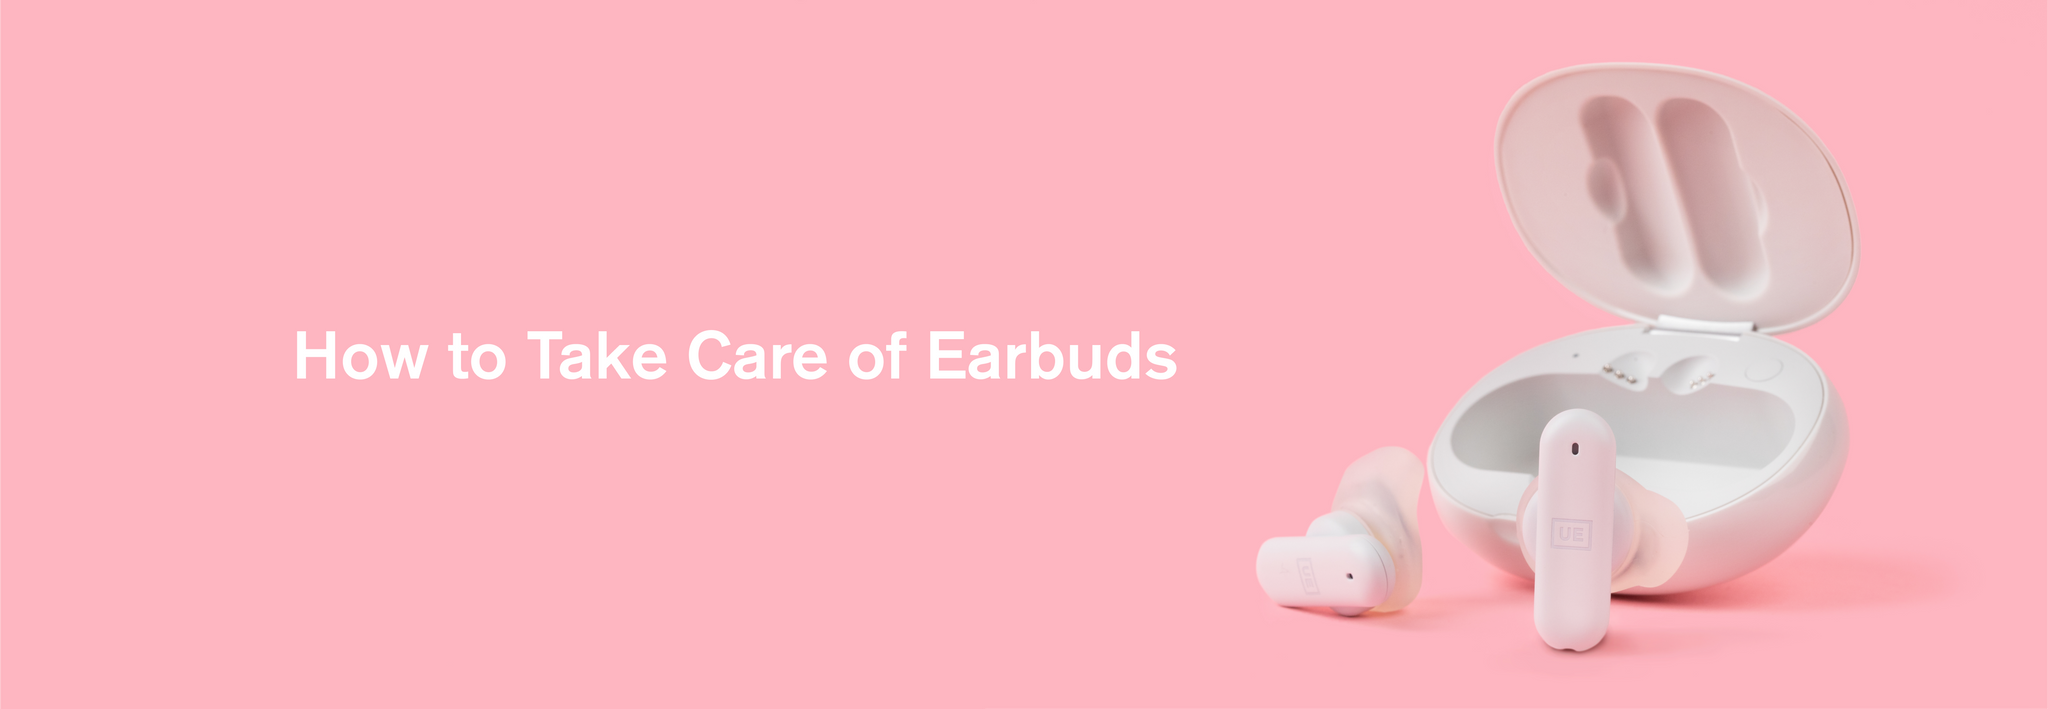 How to Take Care of Earbuds